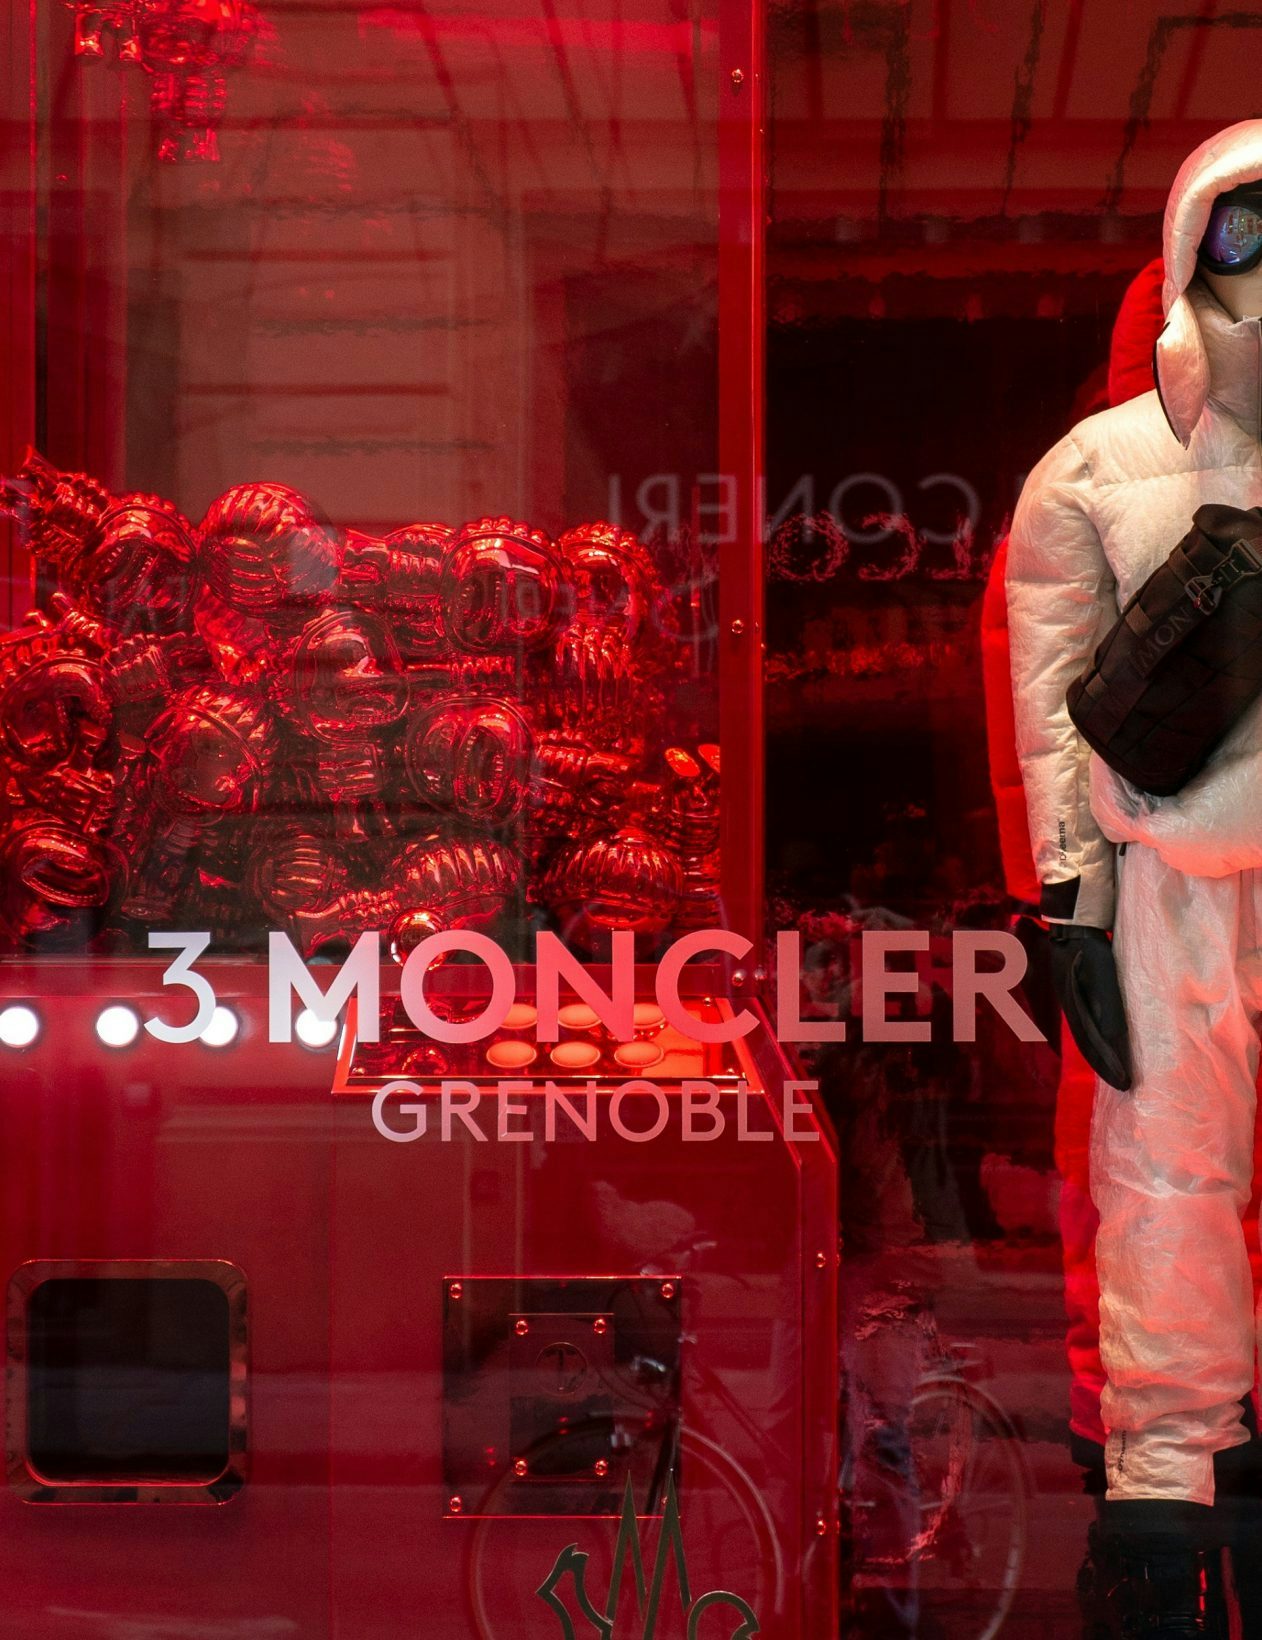 The Moncler group shows strong growth